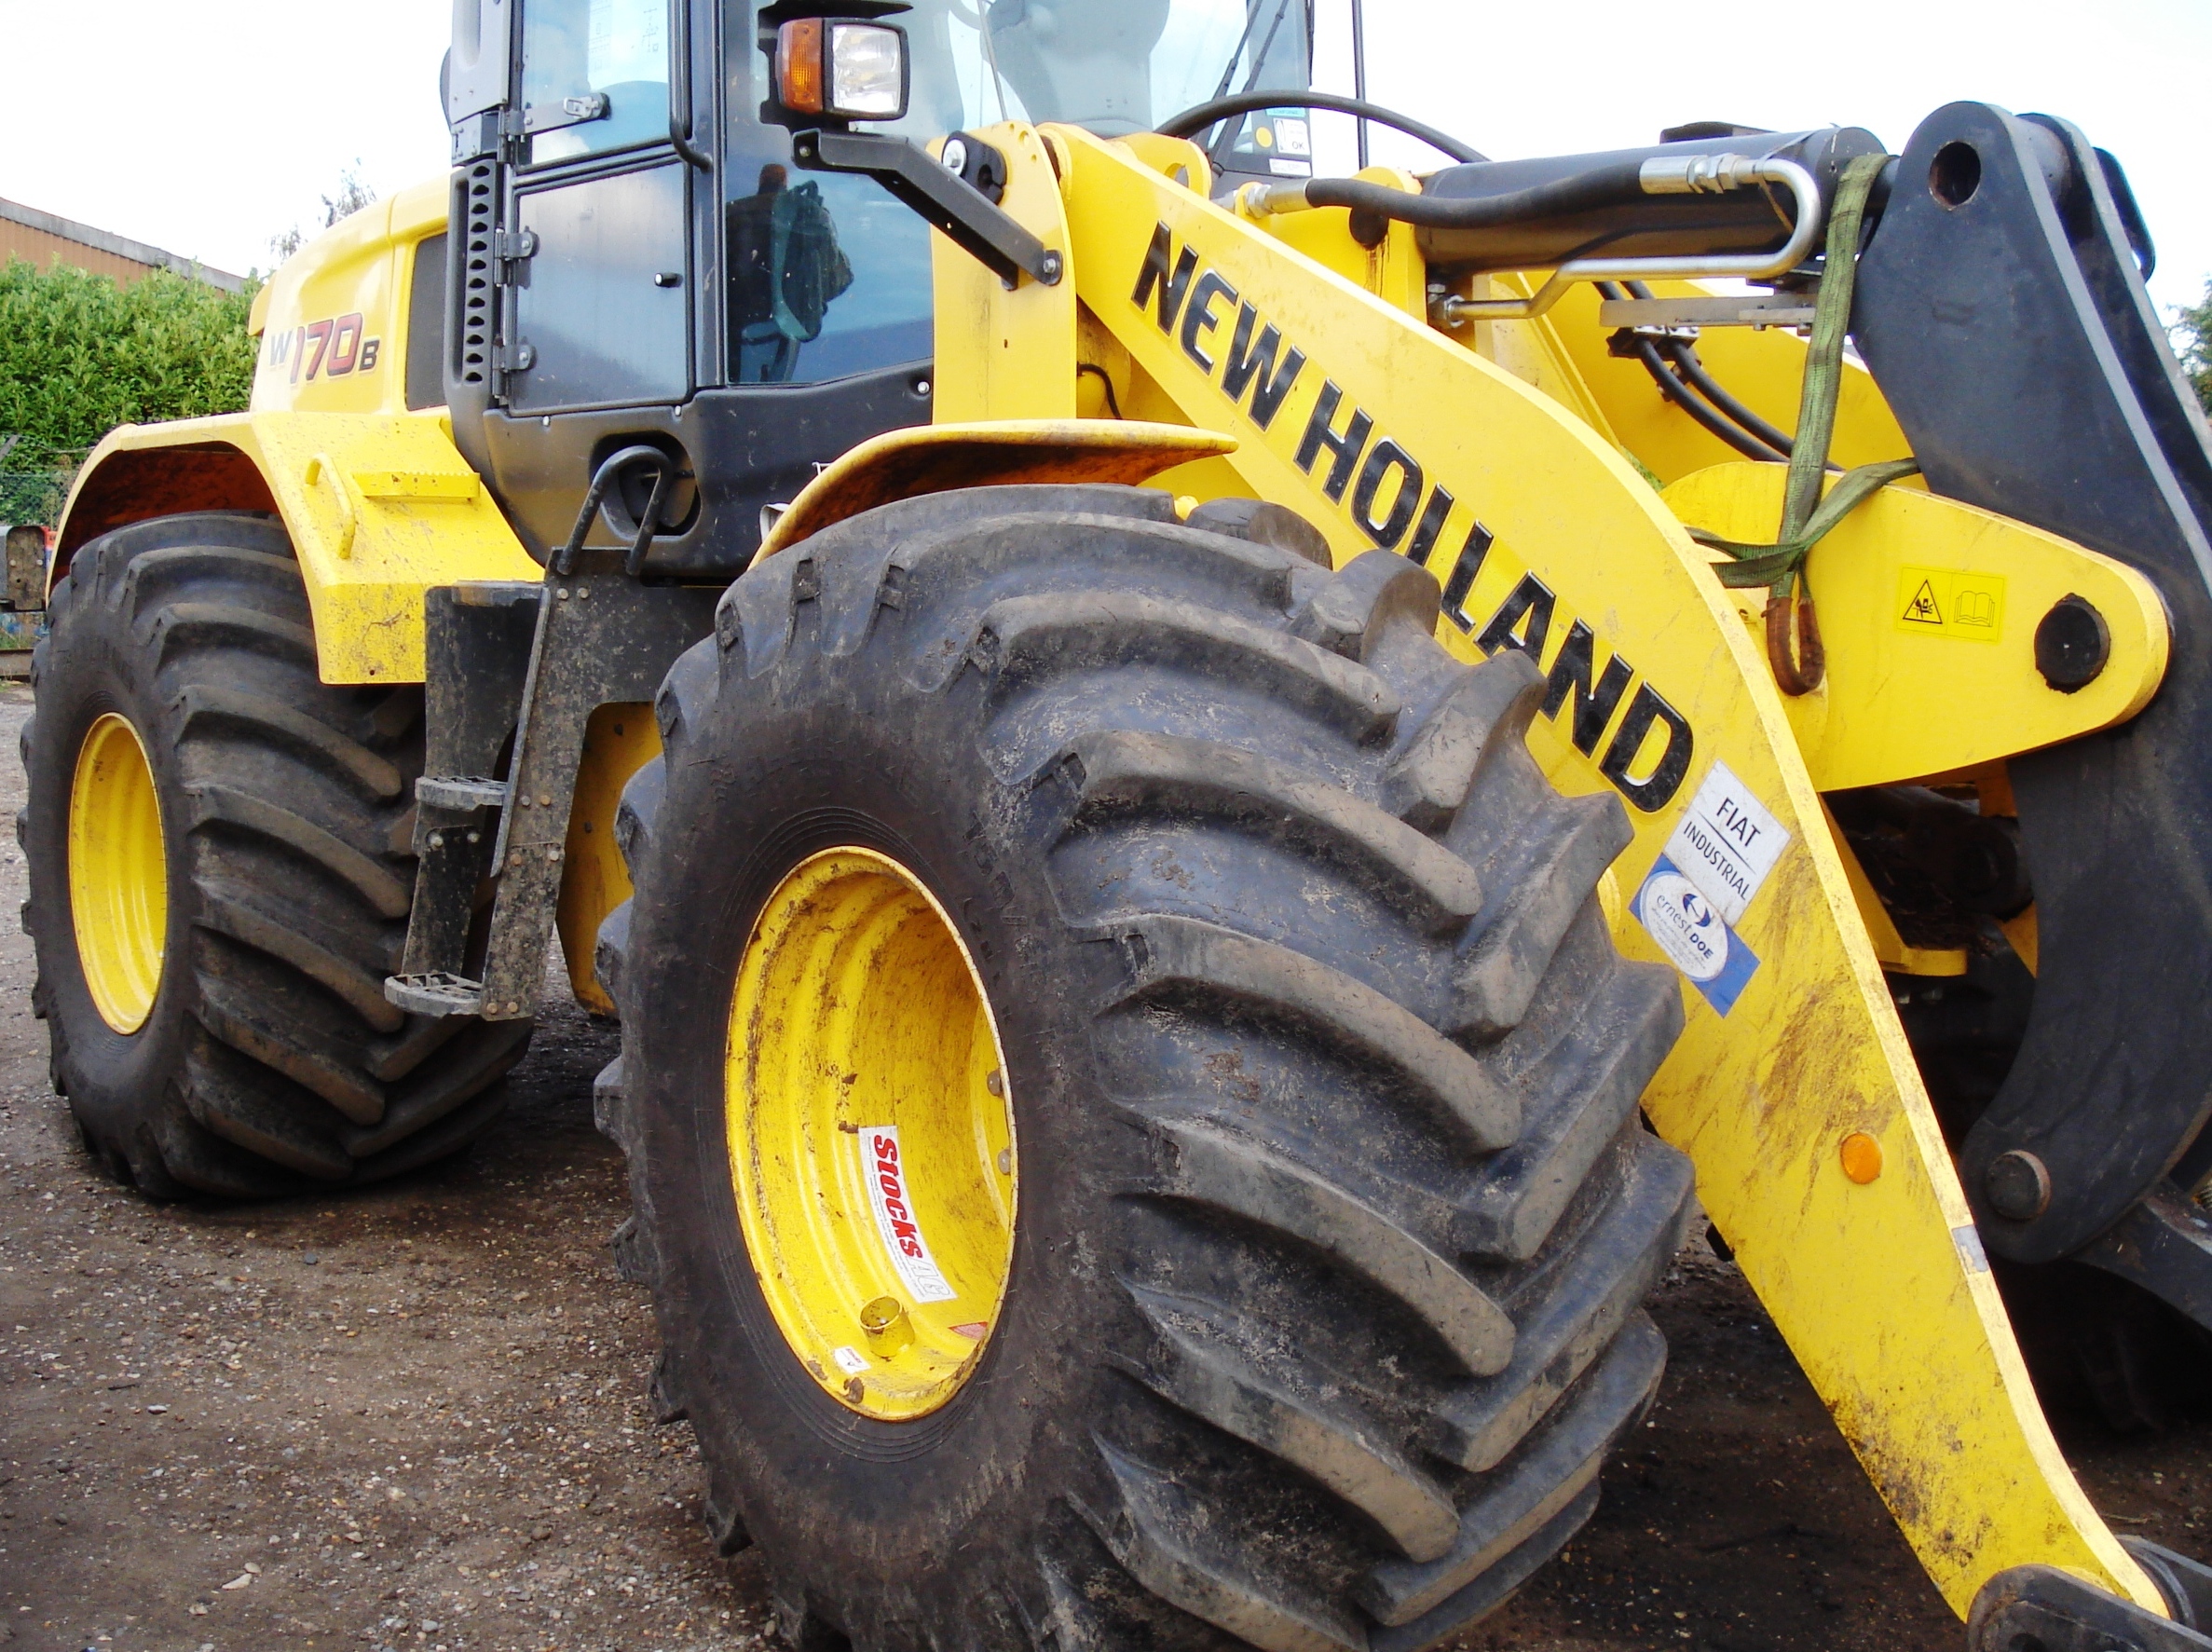 High Strength Wheels fitted to New Holland Shovel